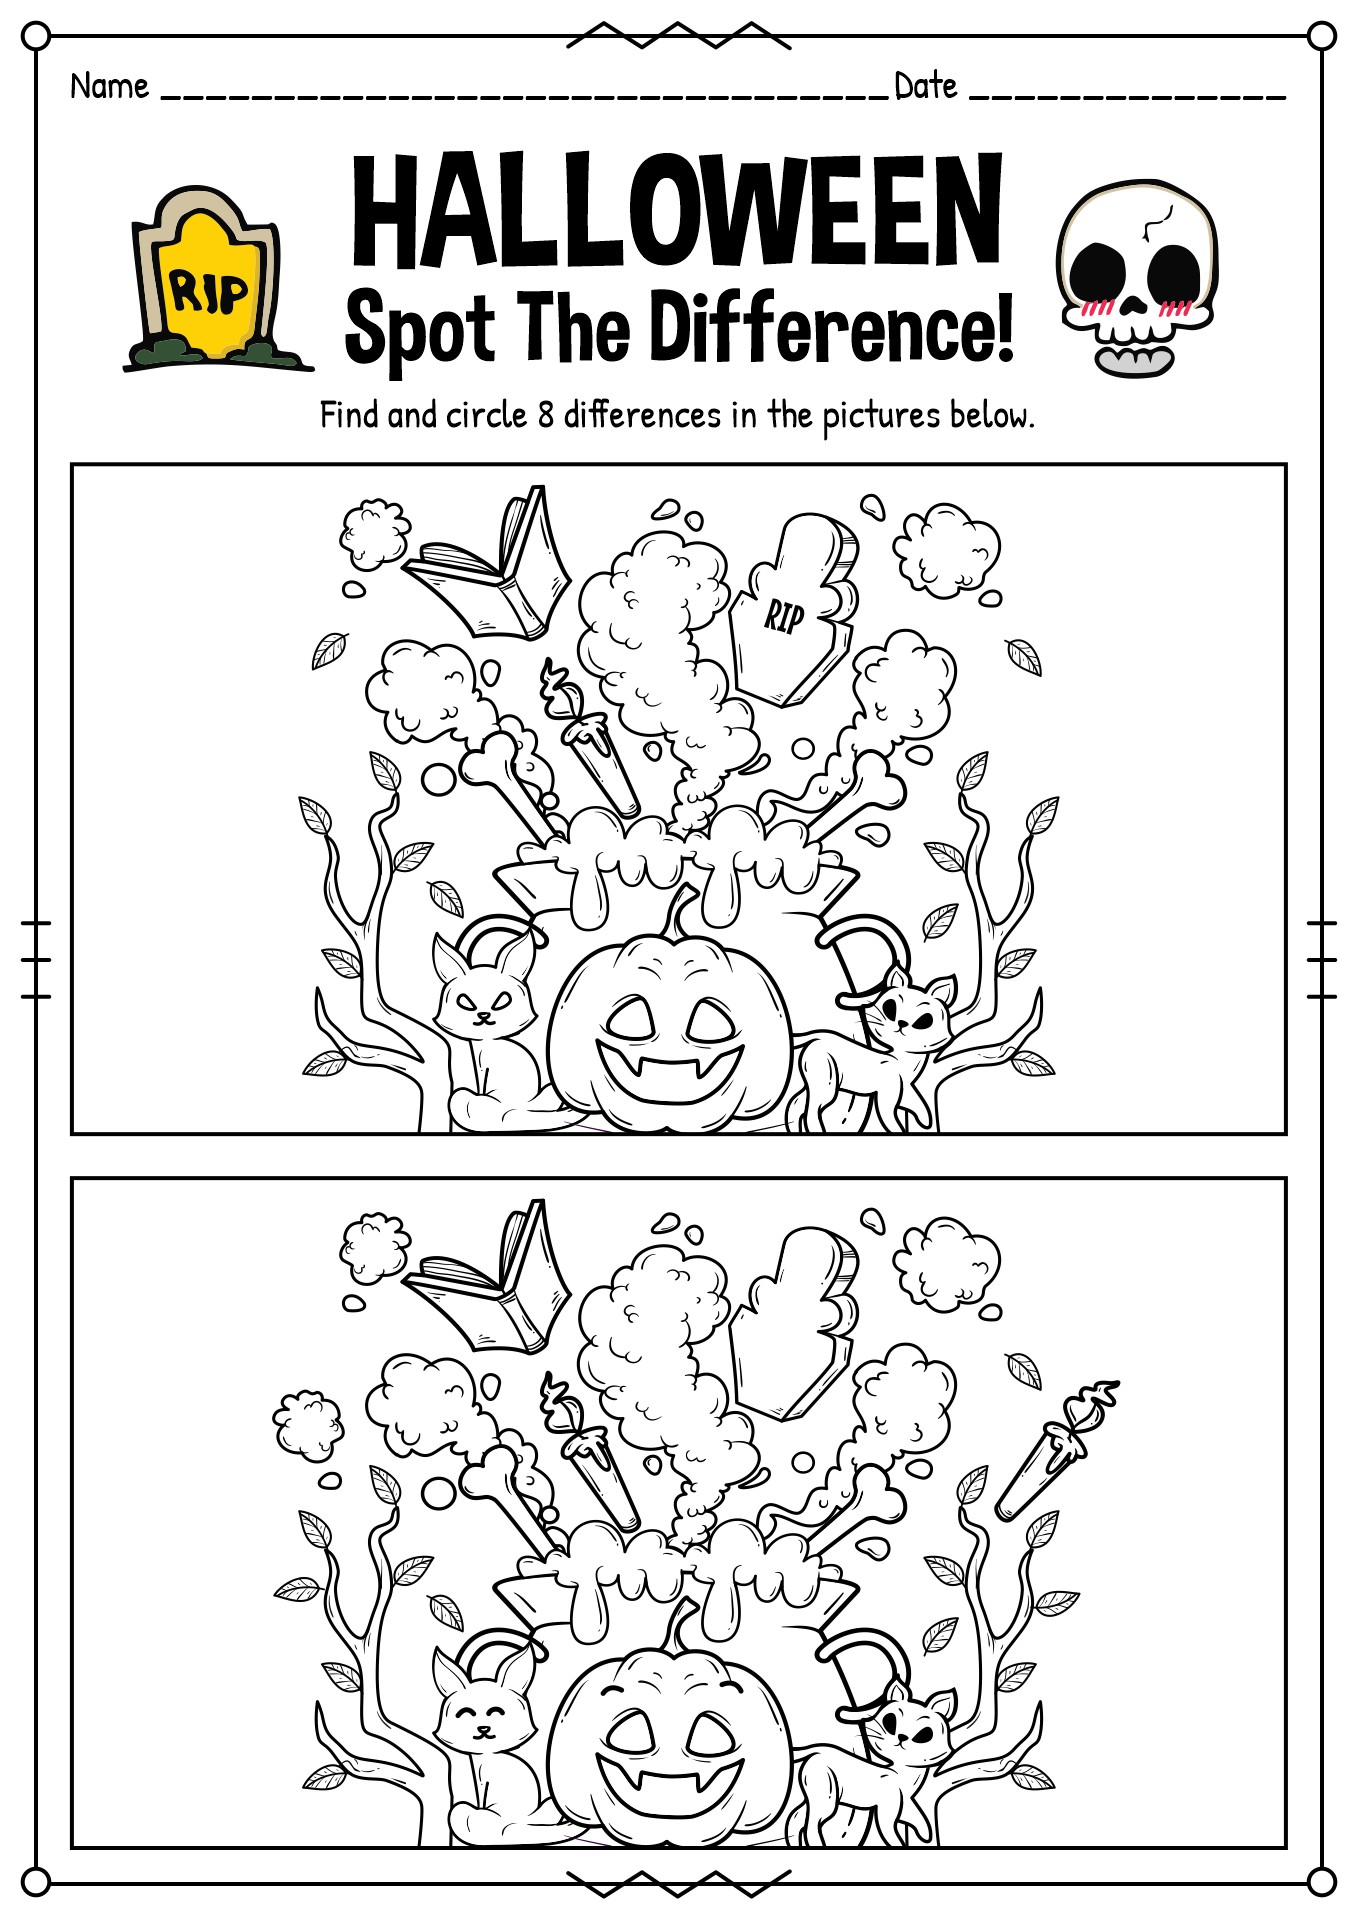 halloween-spot-the-difference-free-printable-216-tech